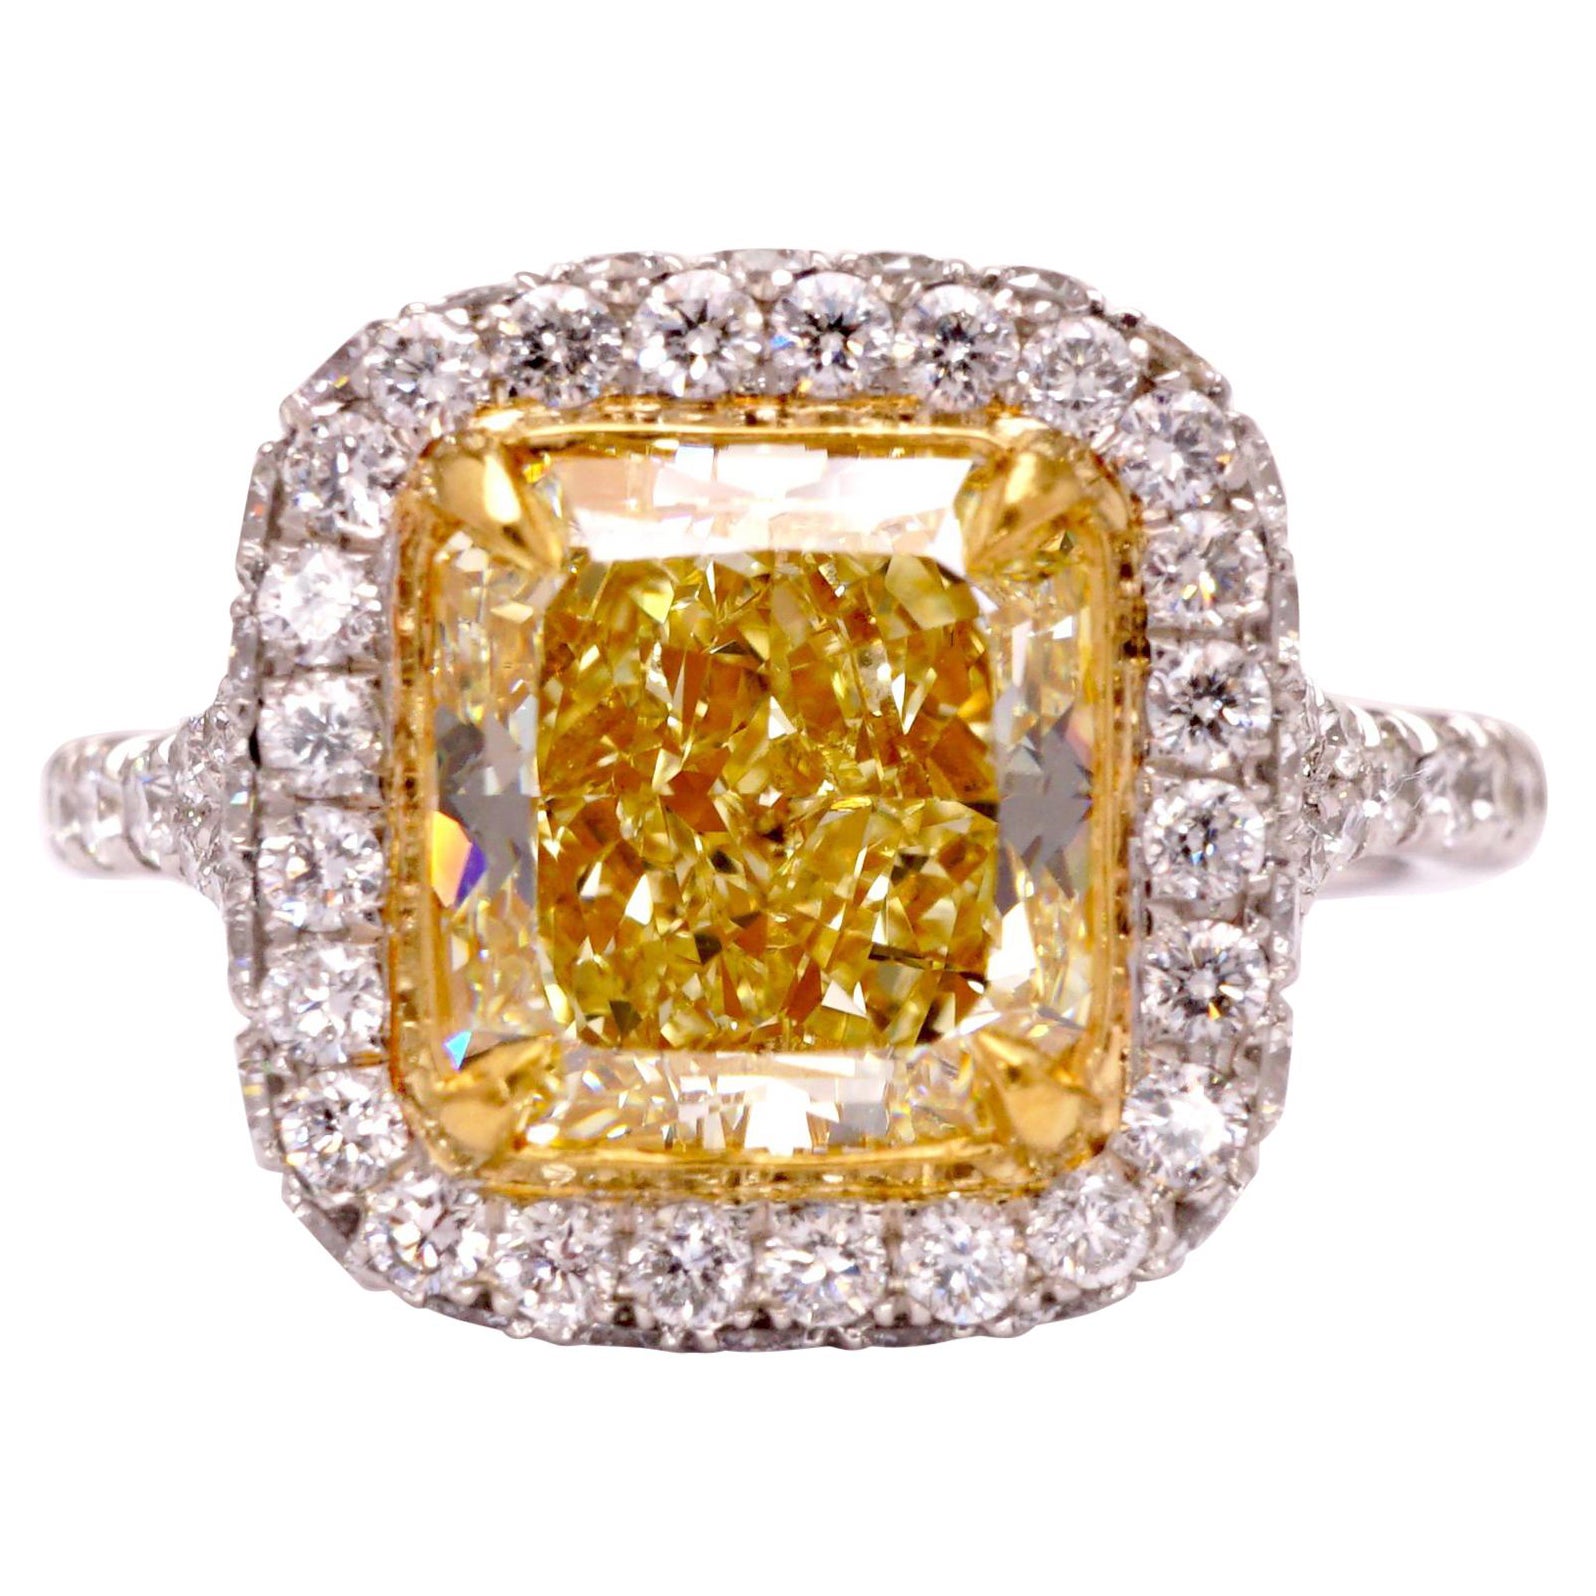 Certified Fancy Yellow Radiant 2.84 Ct Diamond Cocktail Ring Set in Platinum